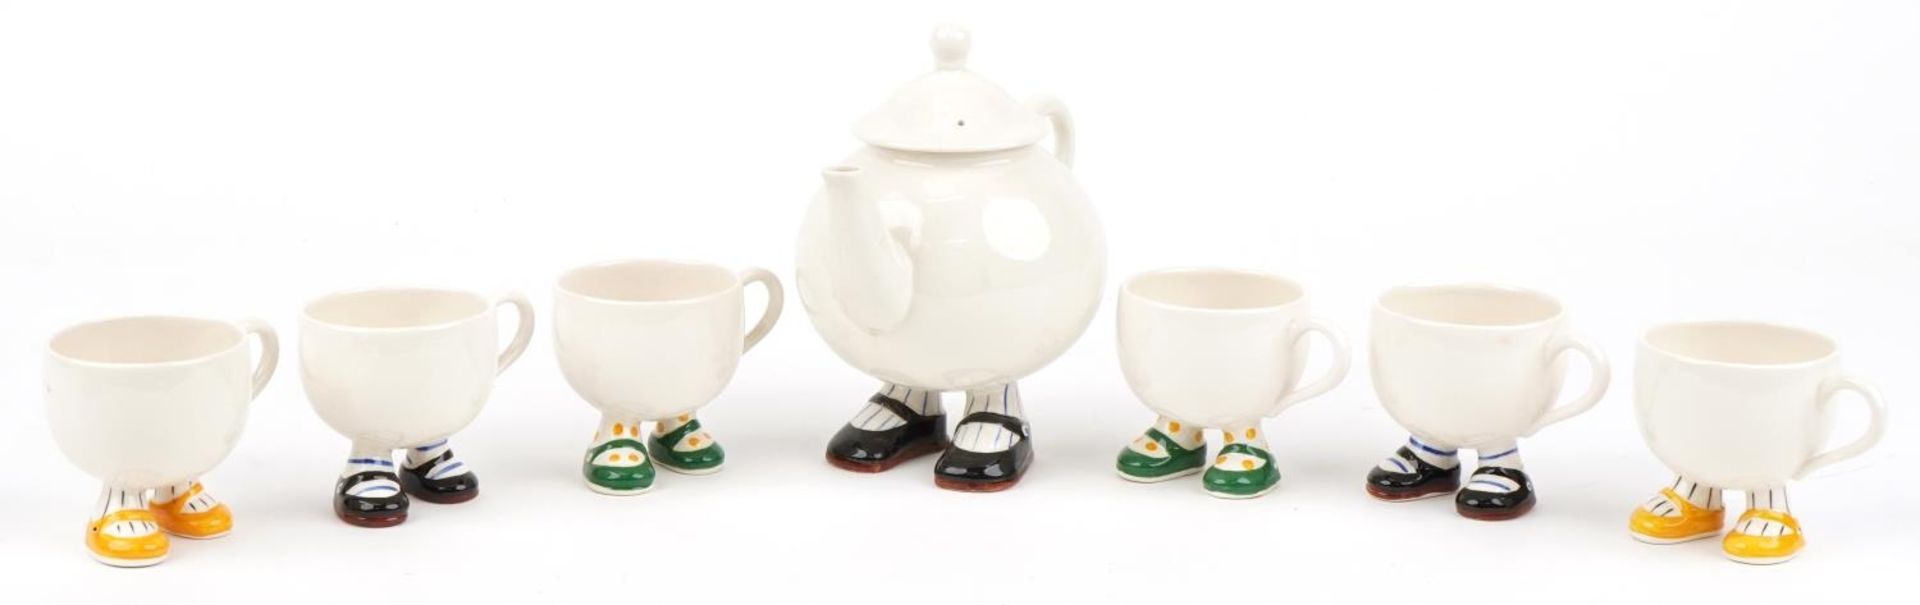 Carltonware Walking teaware comprising teapot and six cups, the largest 21cm in length